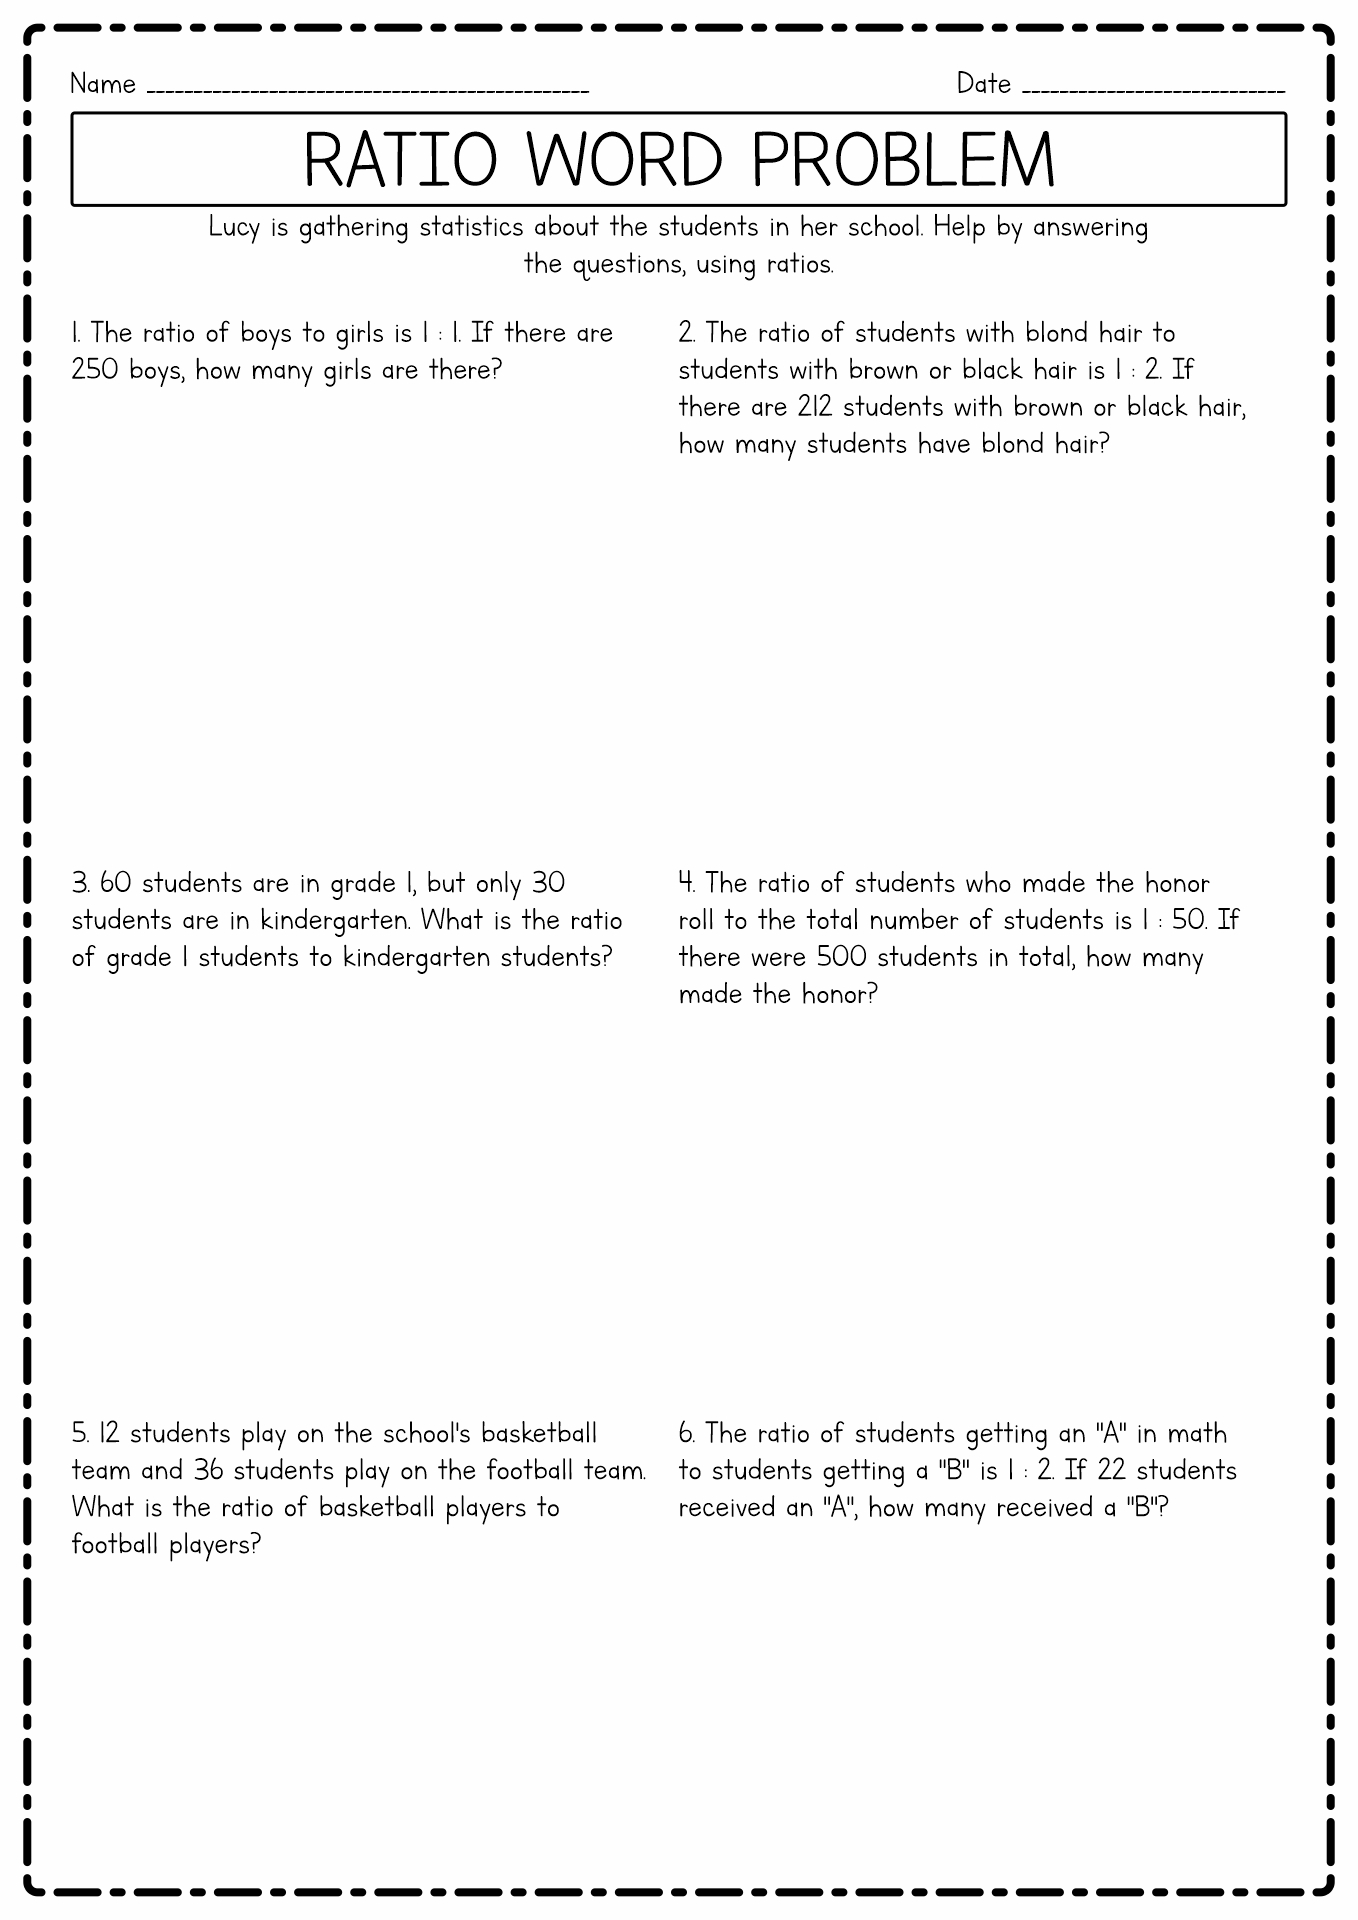 7th Grade Ratio Word Problems Worksheets Image